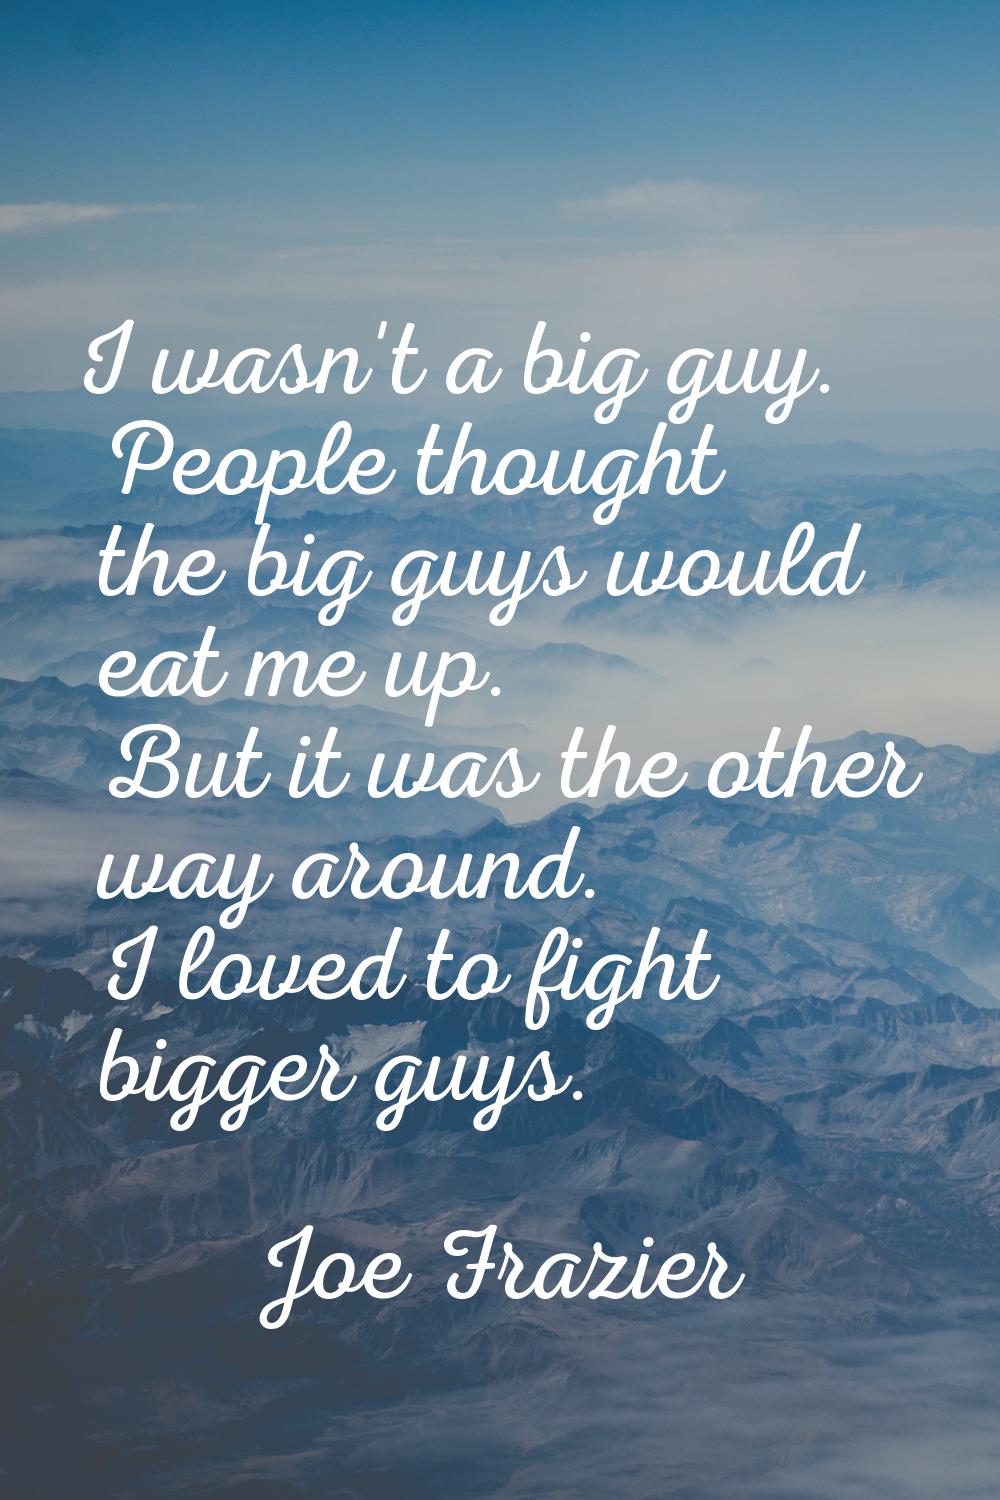 I wasn't a big guy. People thought the big guys would eat me up. But it was the other way around. I